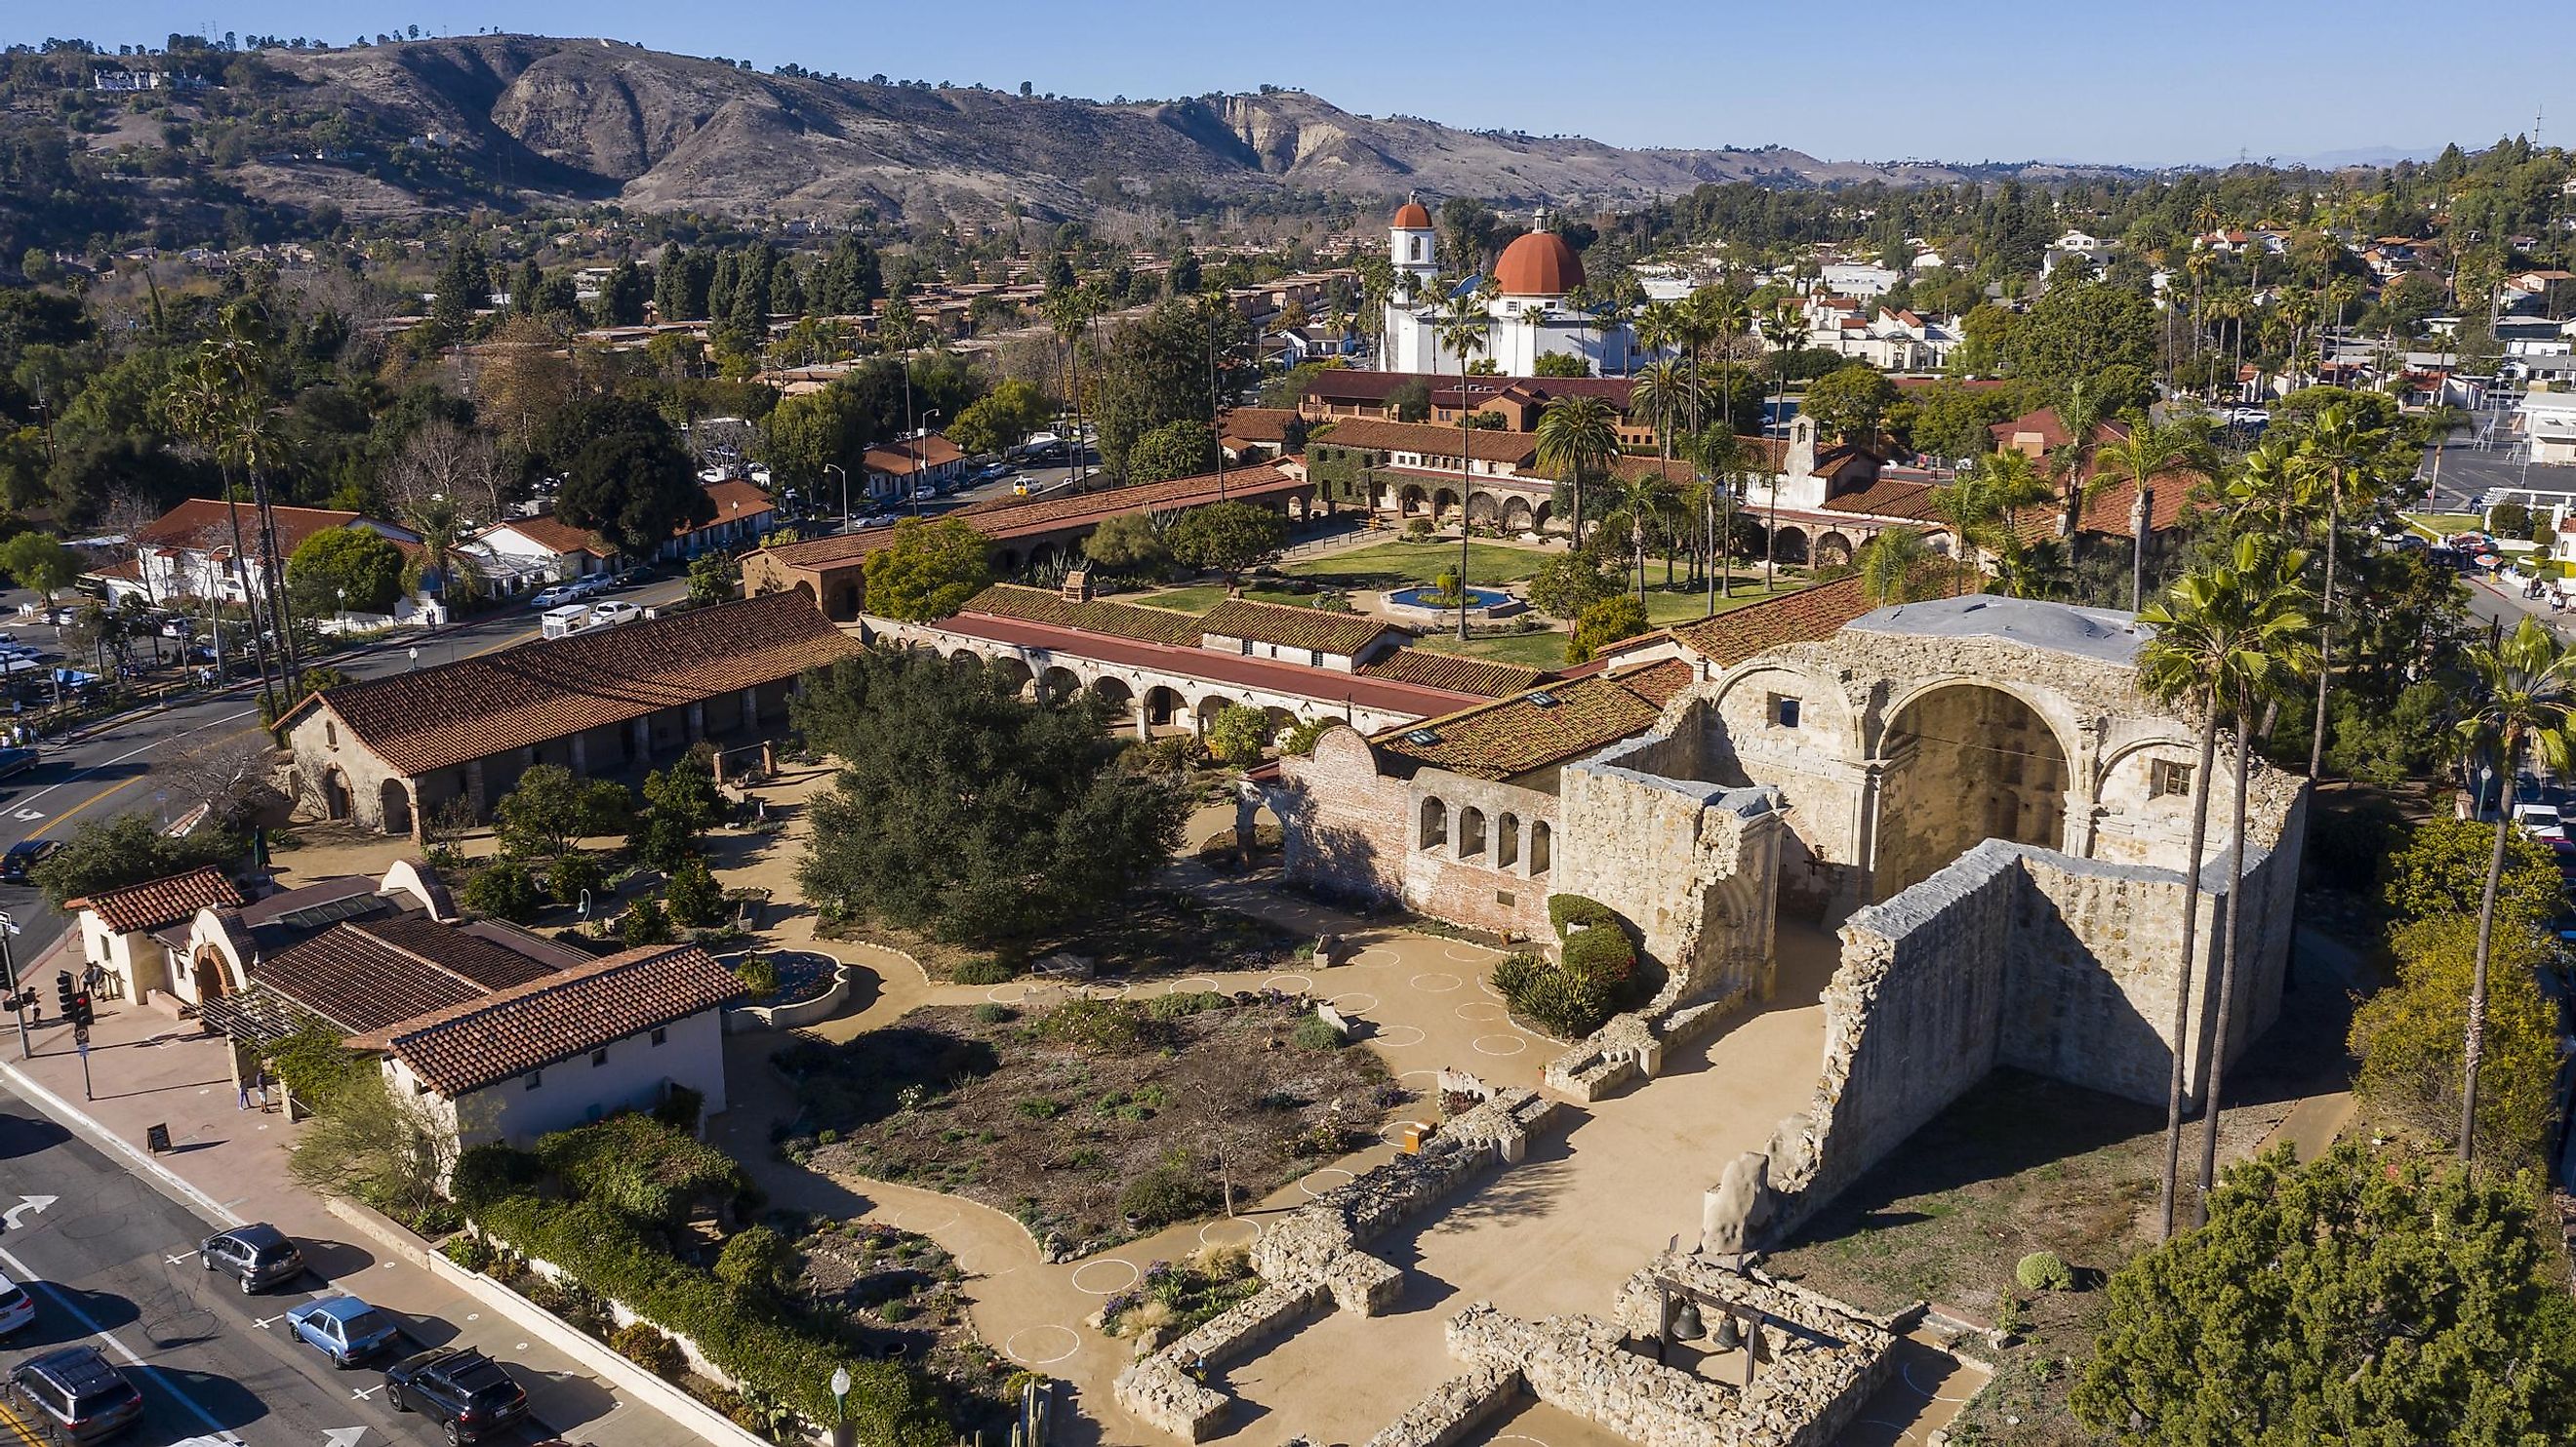 Daytime aerial view of the Spanish Colonial era mission and surrounding city of downtown San Juan Capistrano, California